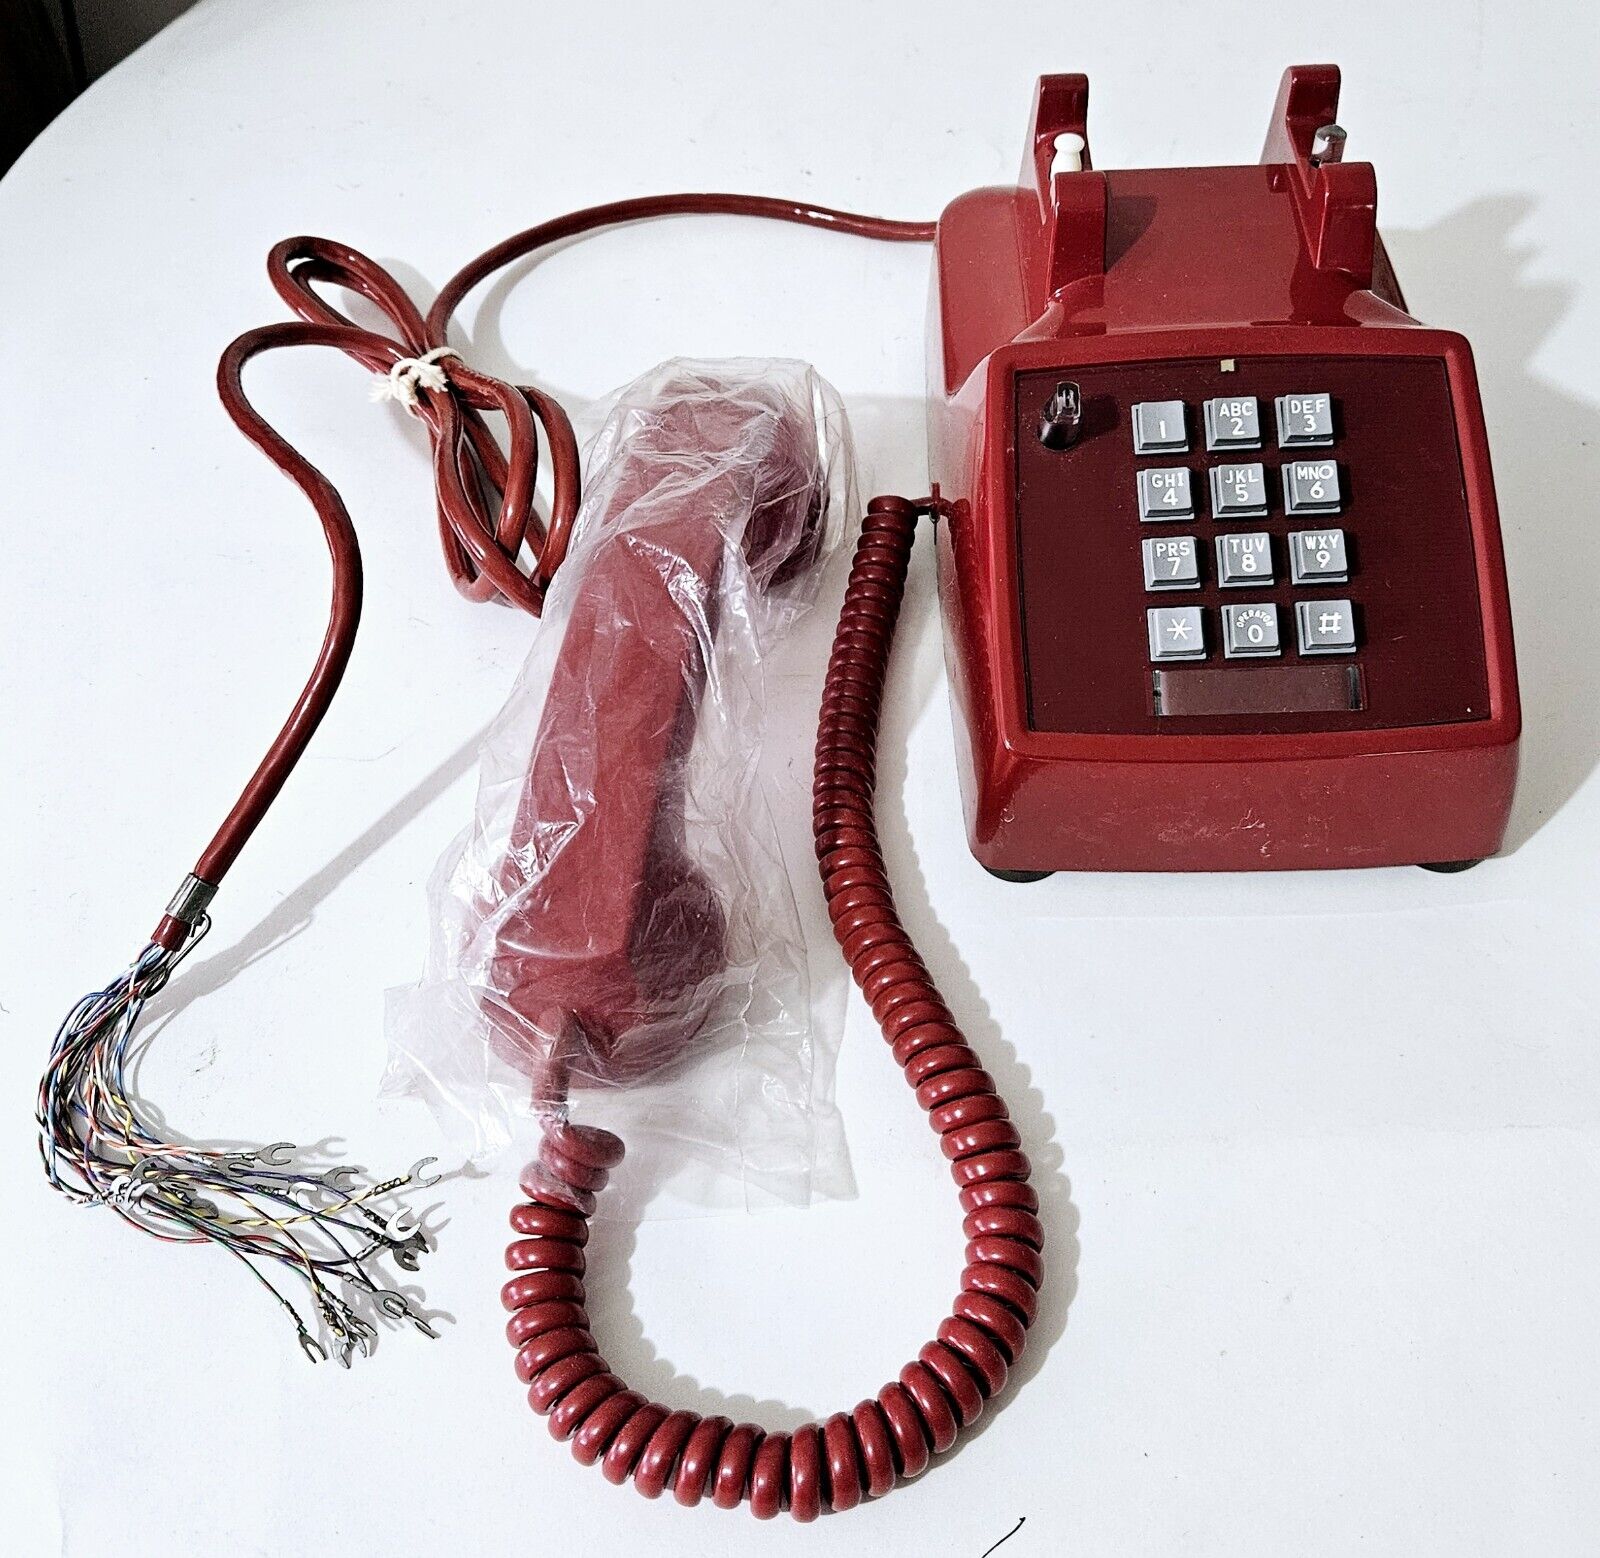 WESTERN ELECTRIC BELL SYSTEMS 2511F RED TELEPHONE Never Used in Original Box.